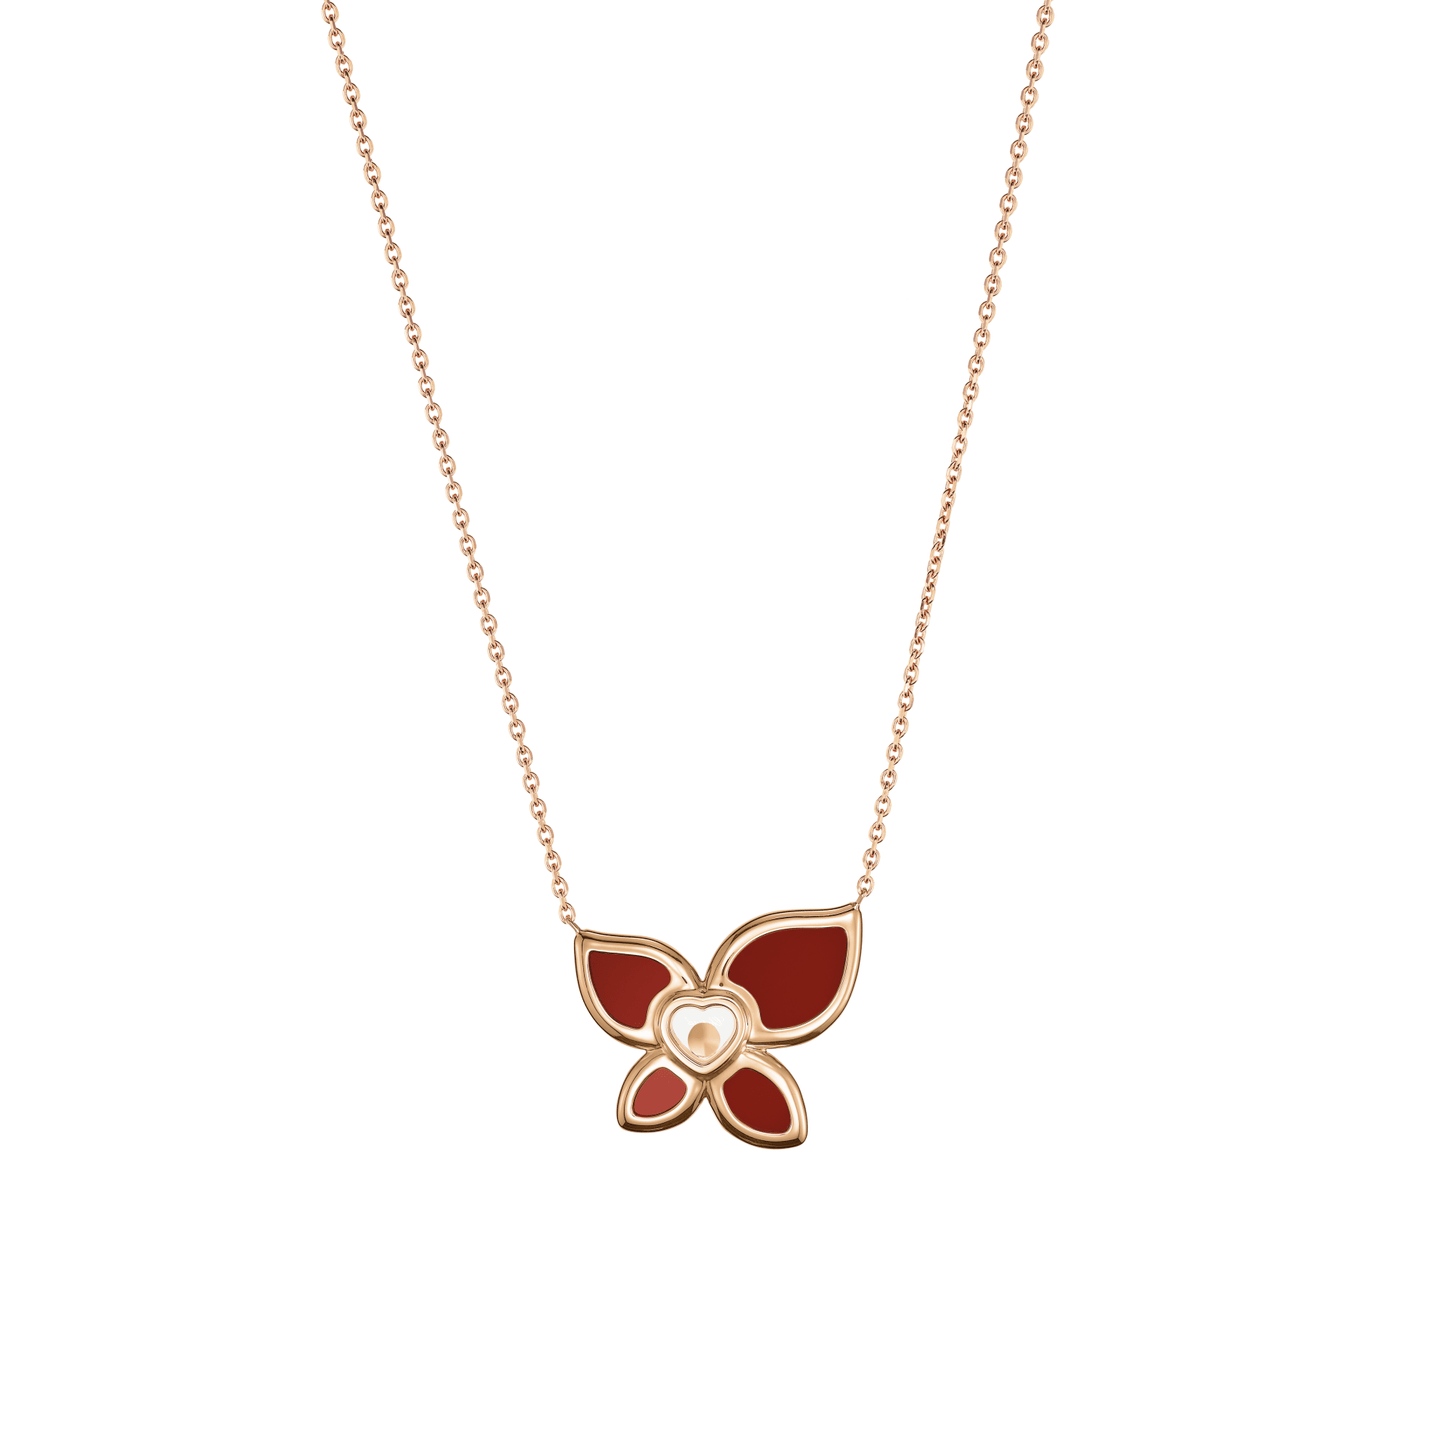 HAPPY BUTTERFLY X MARIAH CAREY NECKLACE, ETHICAL ROSE GOLD, DIAMOND, CARNELIAN 818599-5001